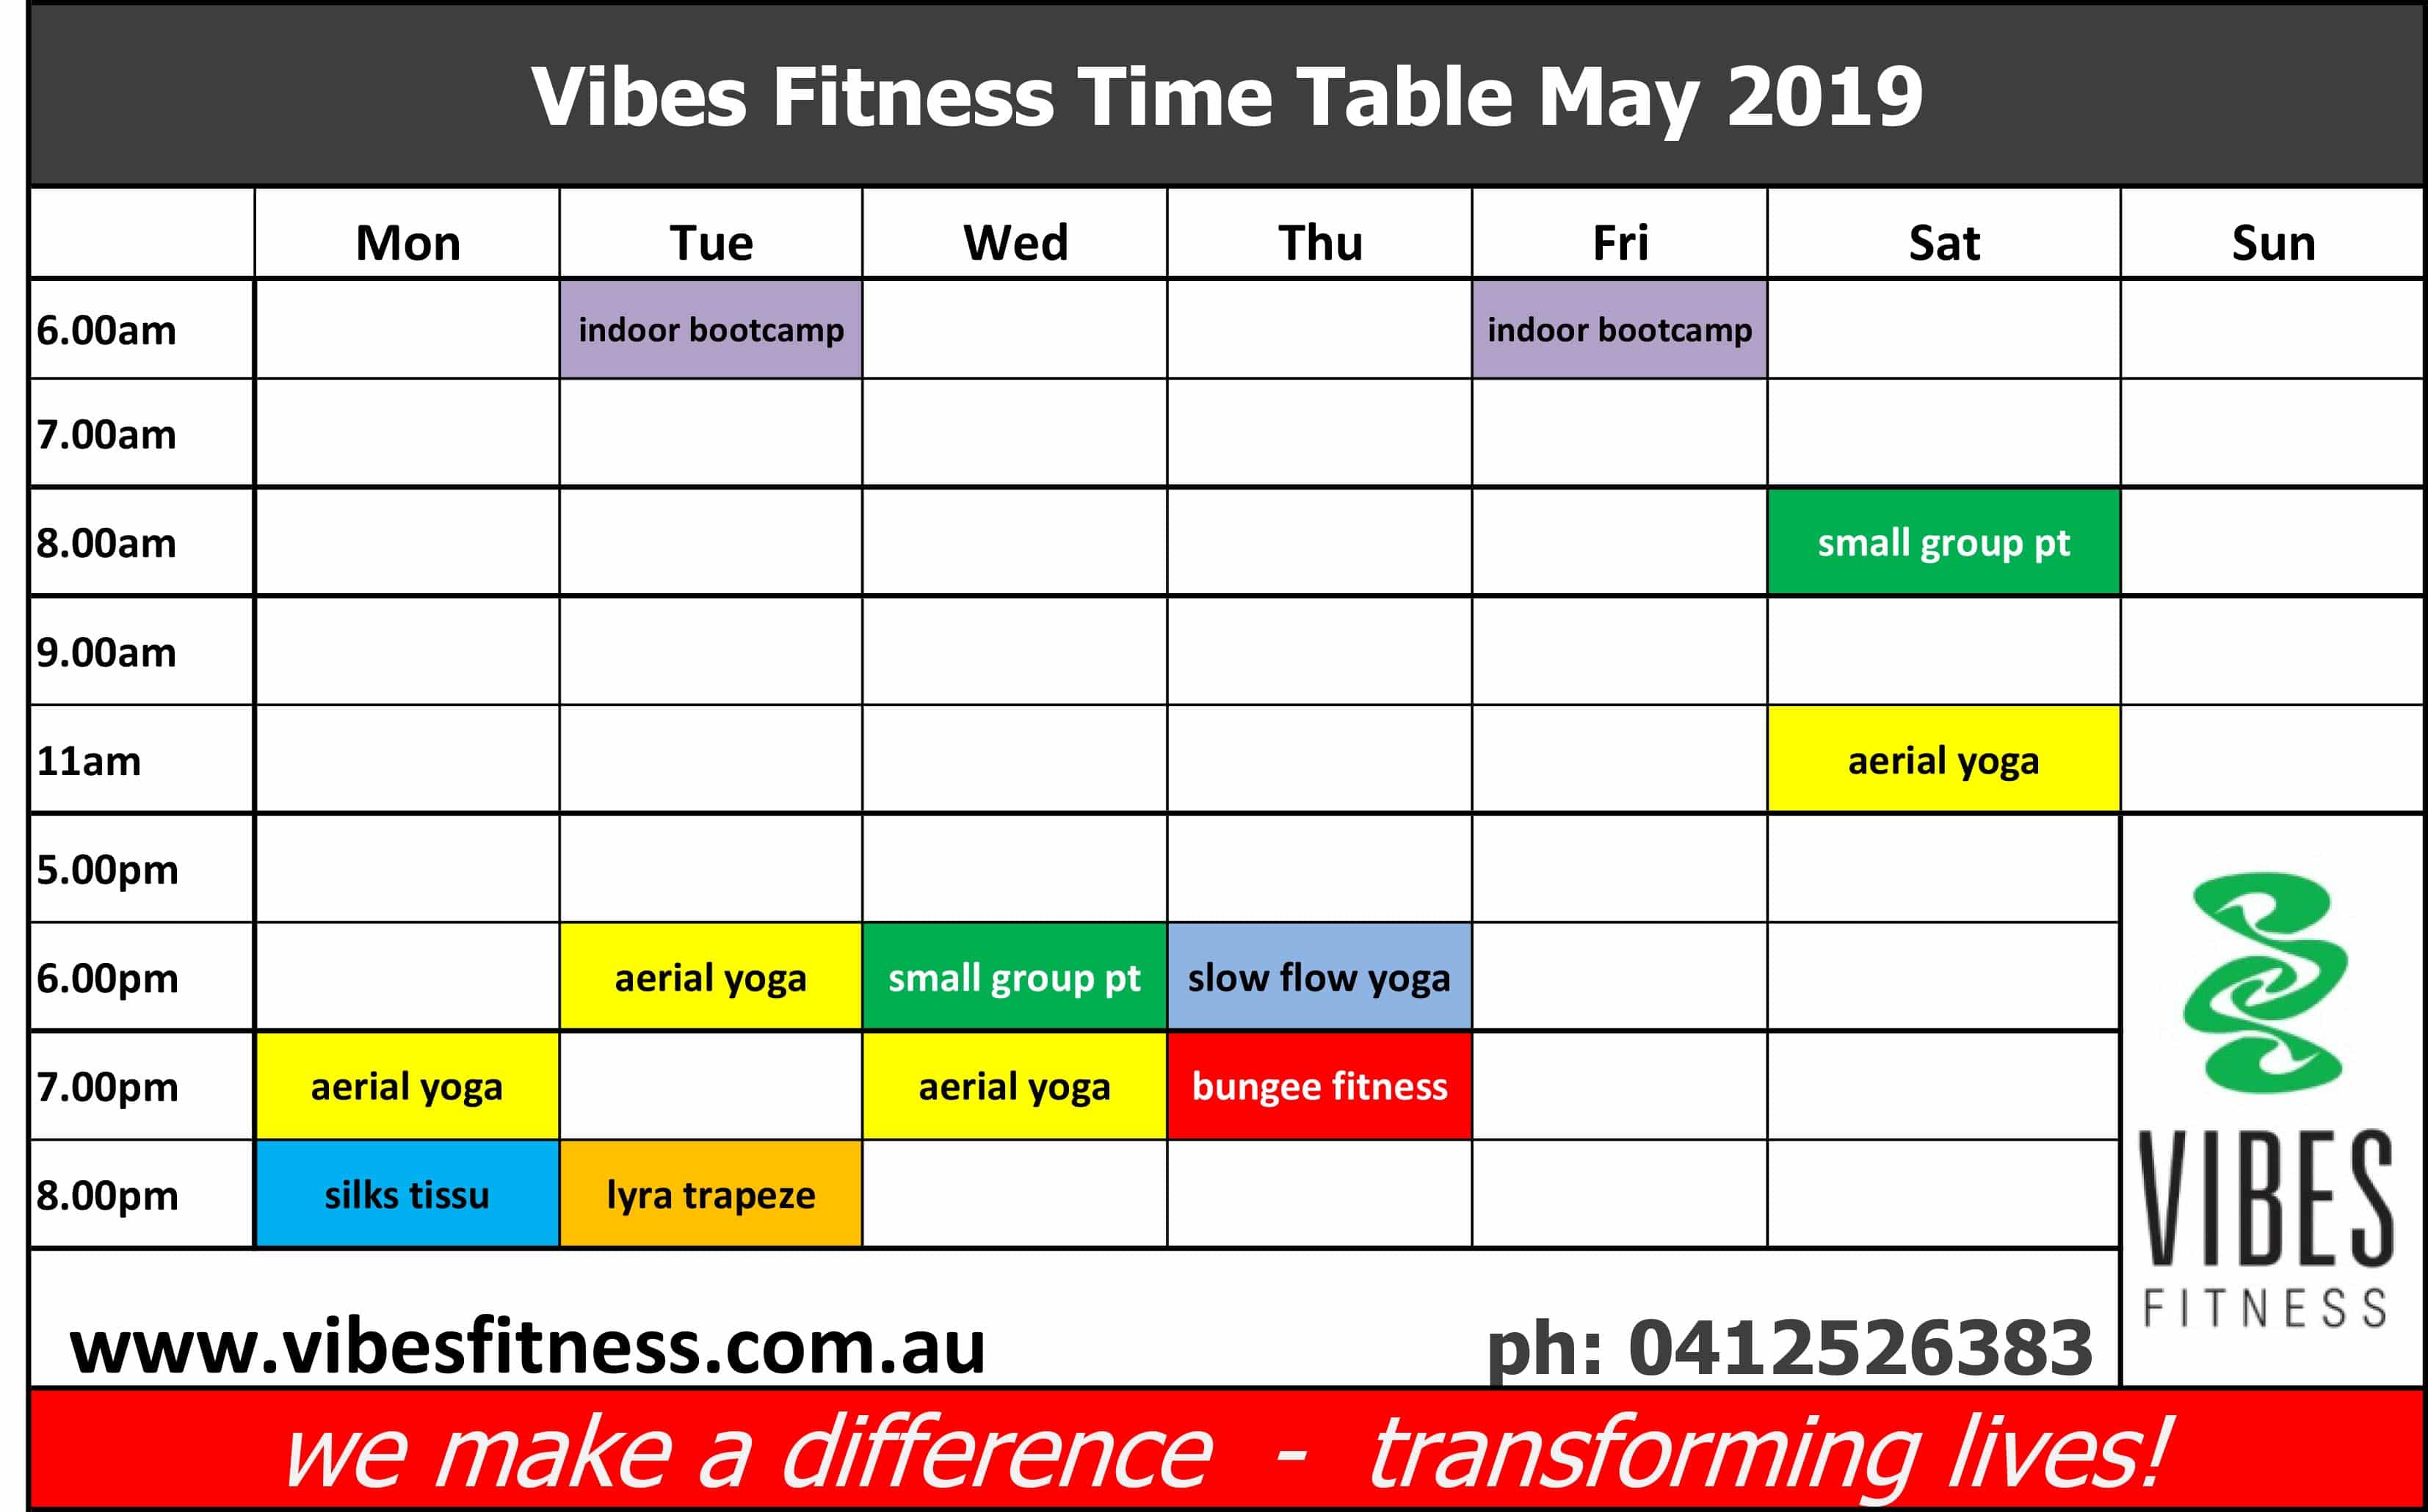 Vibe Fitness Time Table